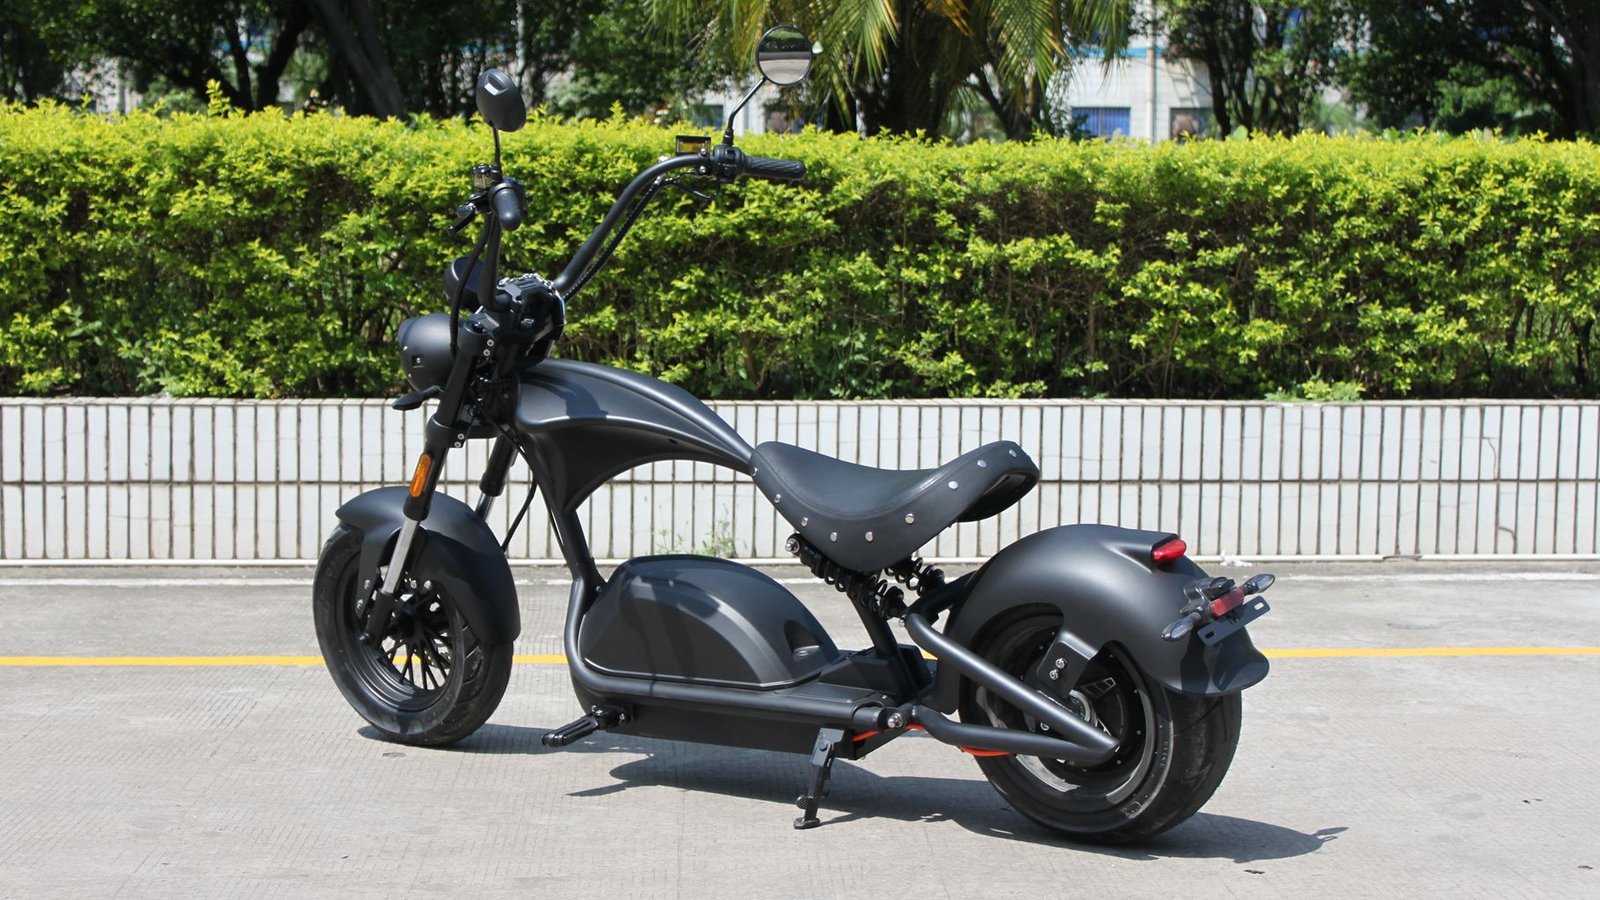 Rooder Mangosteen Sara M1ps 72v 4000w citycoco chopper electric motorcycle scooter (8)